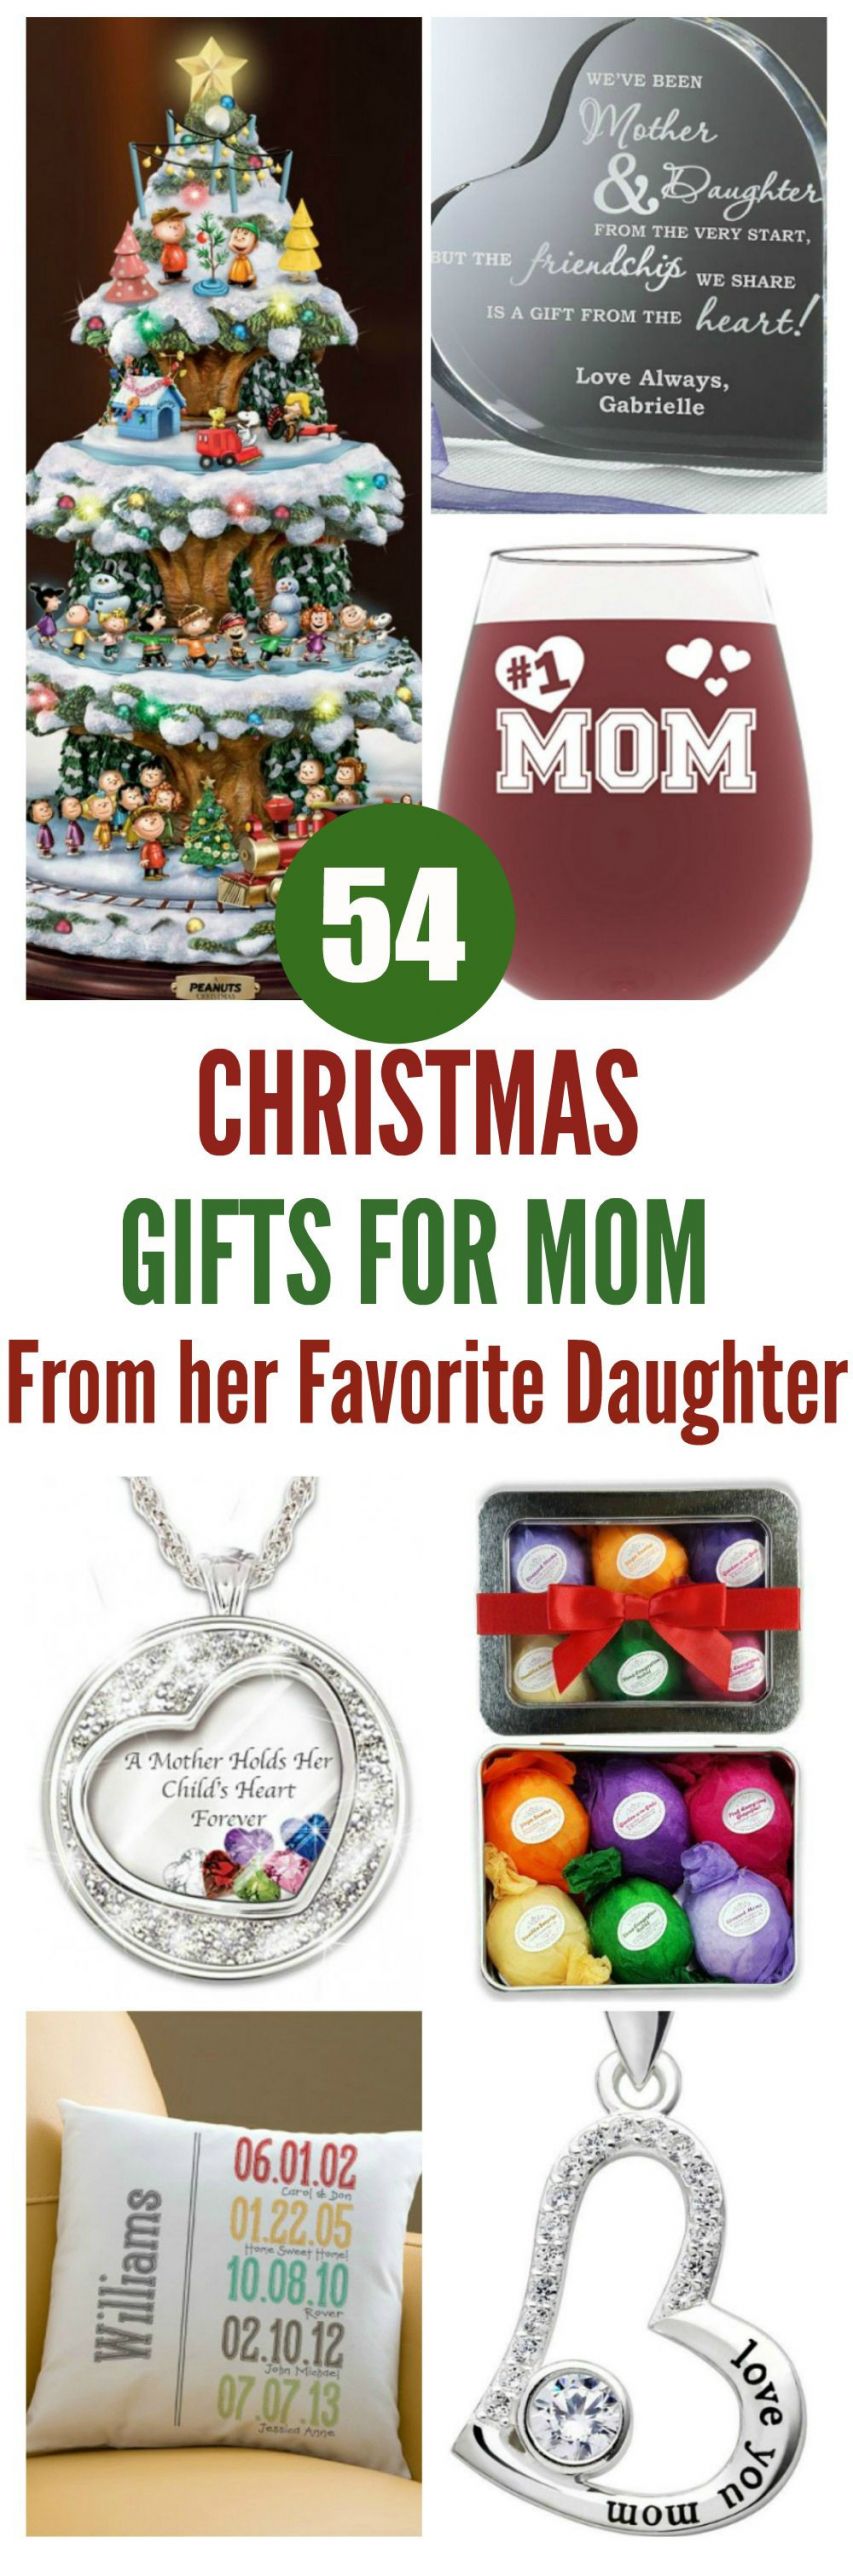 Great Christmas Gift Ideas For Moms
 Gifts for Mom from Her Daughter Top 60 Gifts